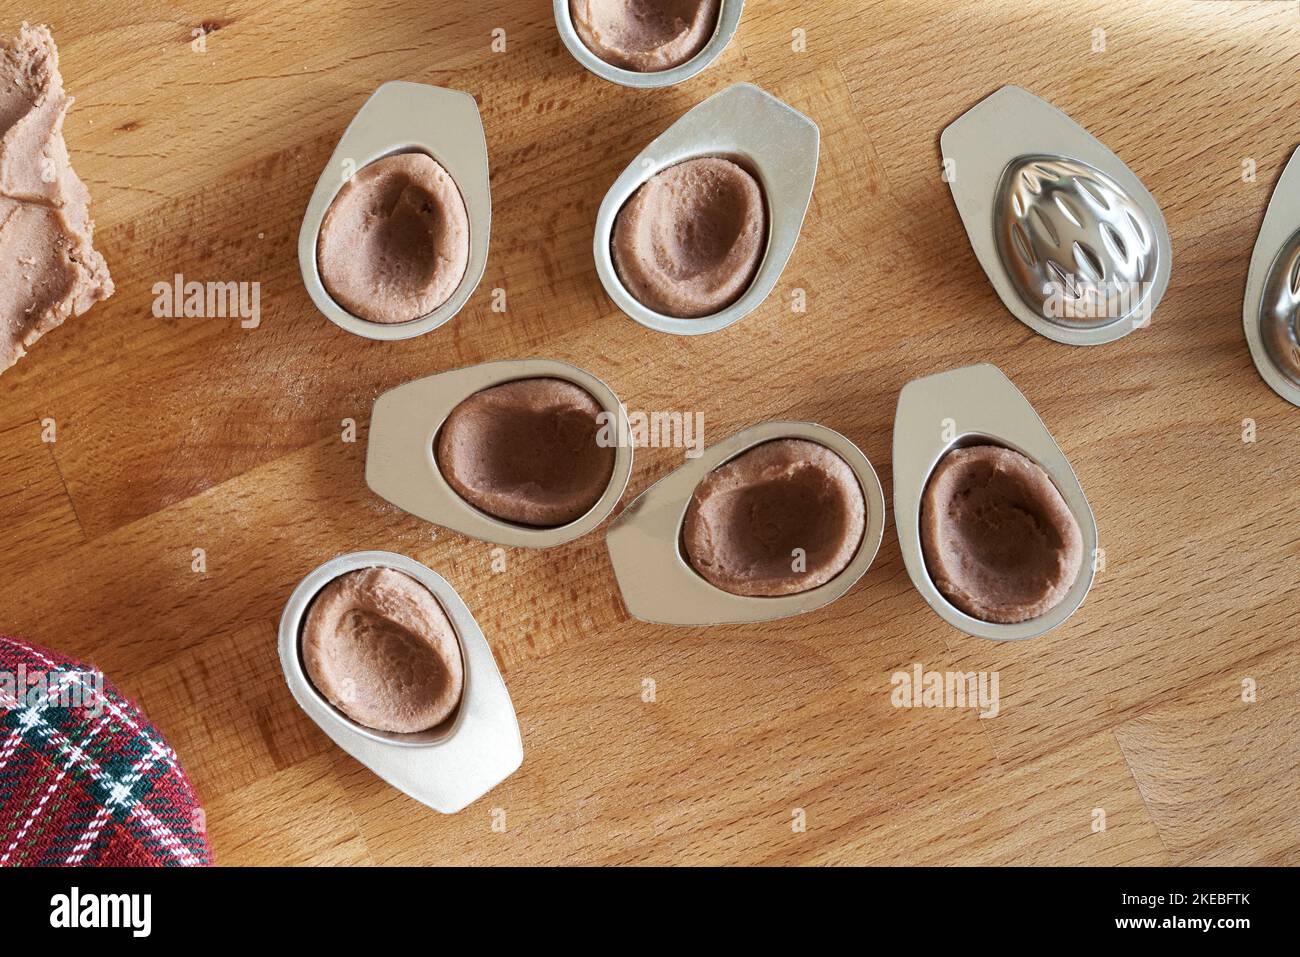 https://c8.alamy.com/comp/2KEBFTK/preparing-homemade-cocoa-christmas-cookies-in-the-form-of-nuts-pressing-the-dough-into-tin-moulds-top-view-2KEBFTK.jpg